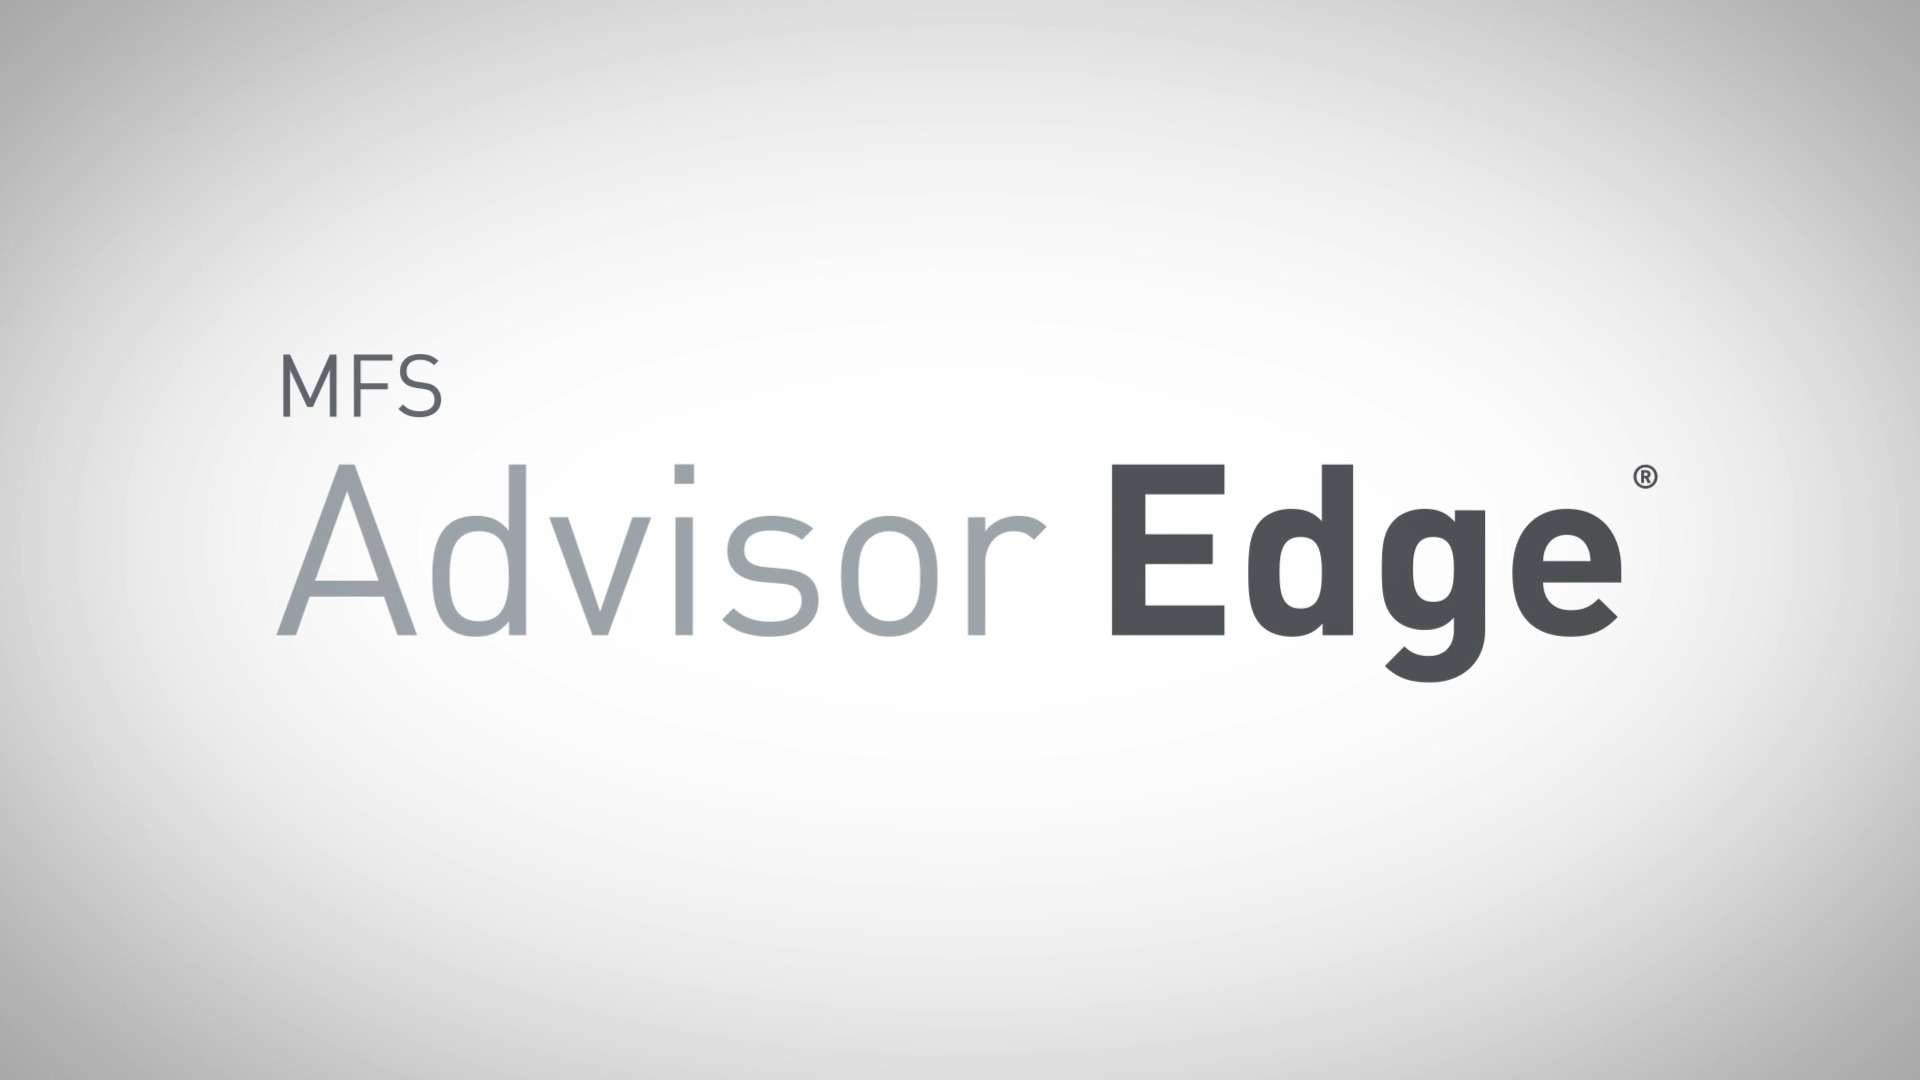  Advisor Edge: Find your brand of excellence